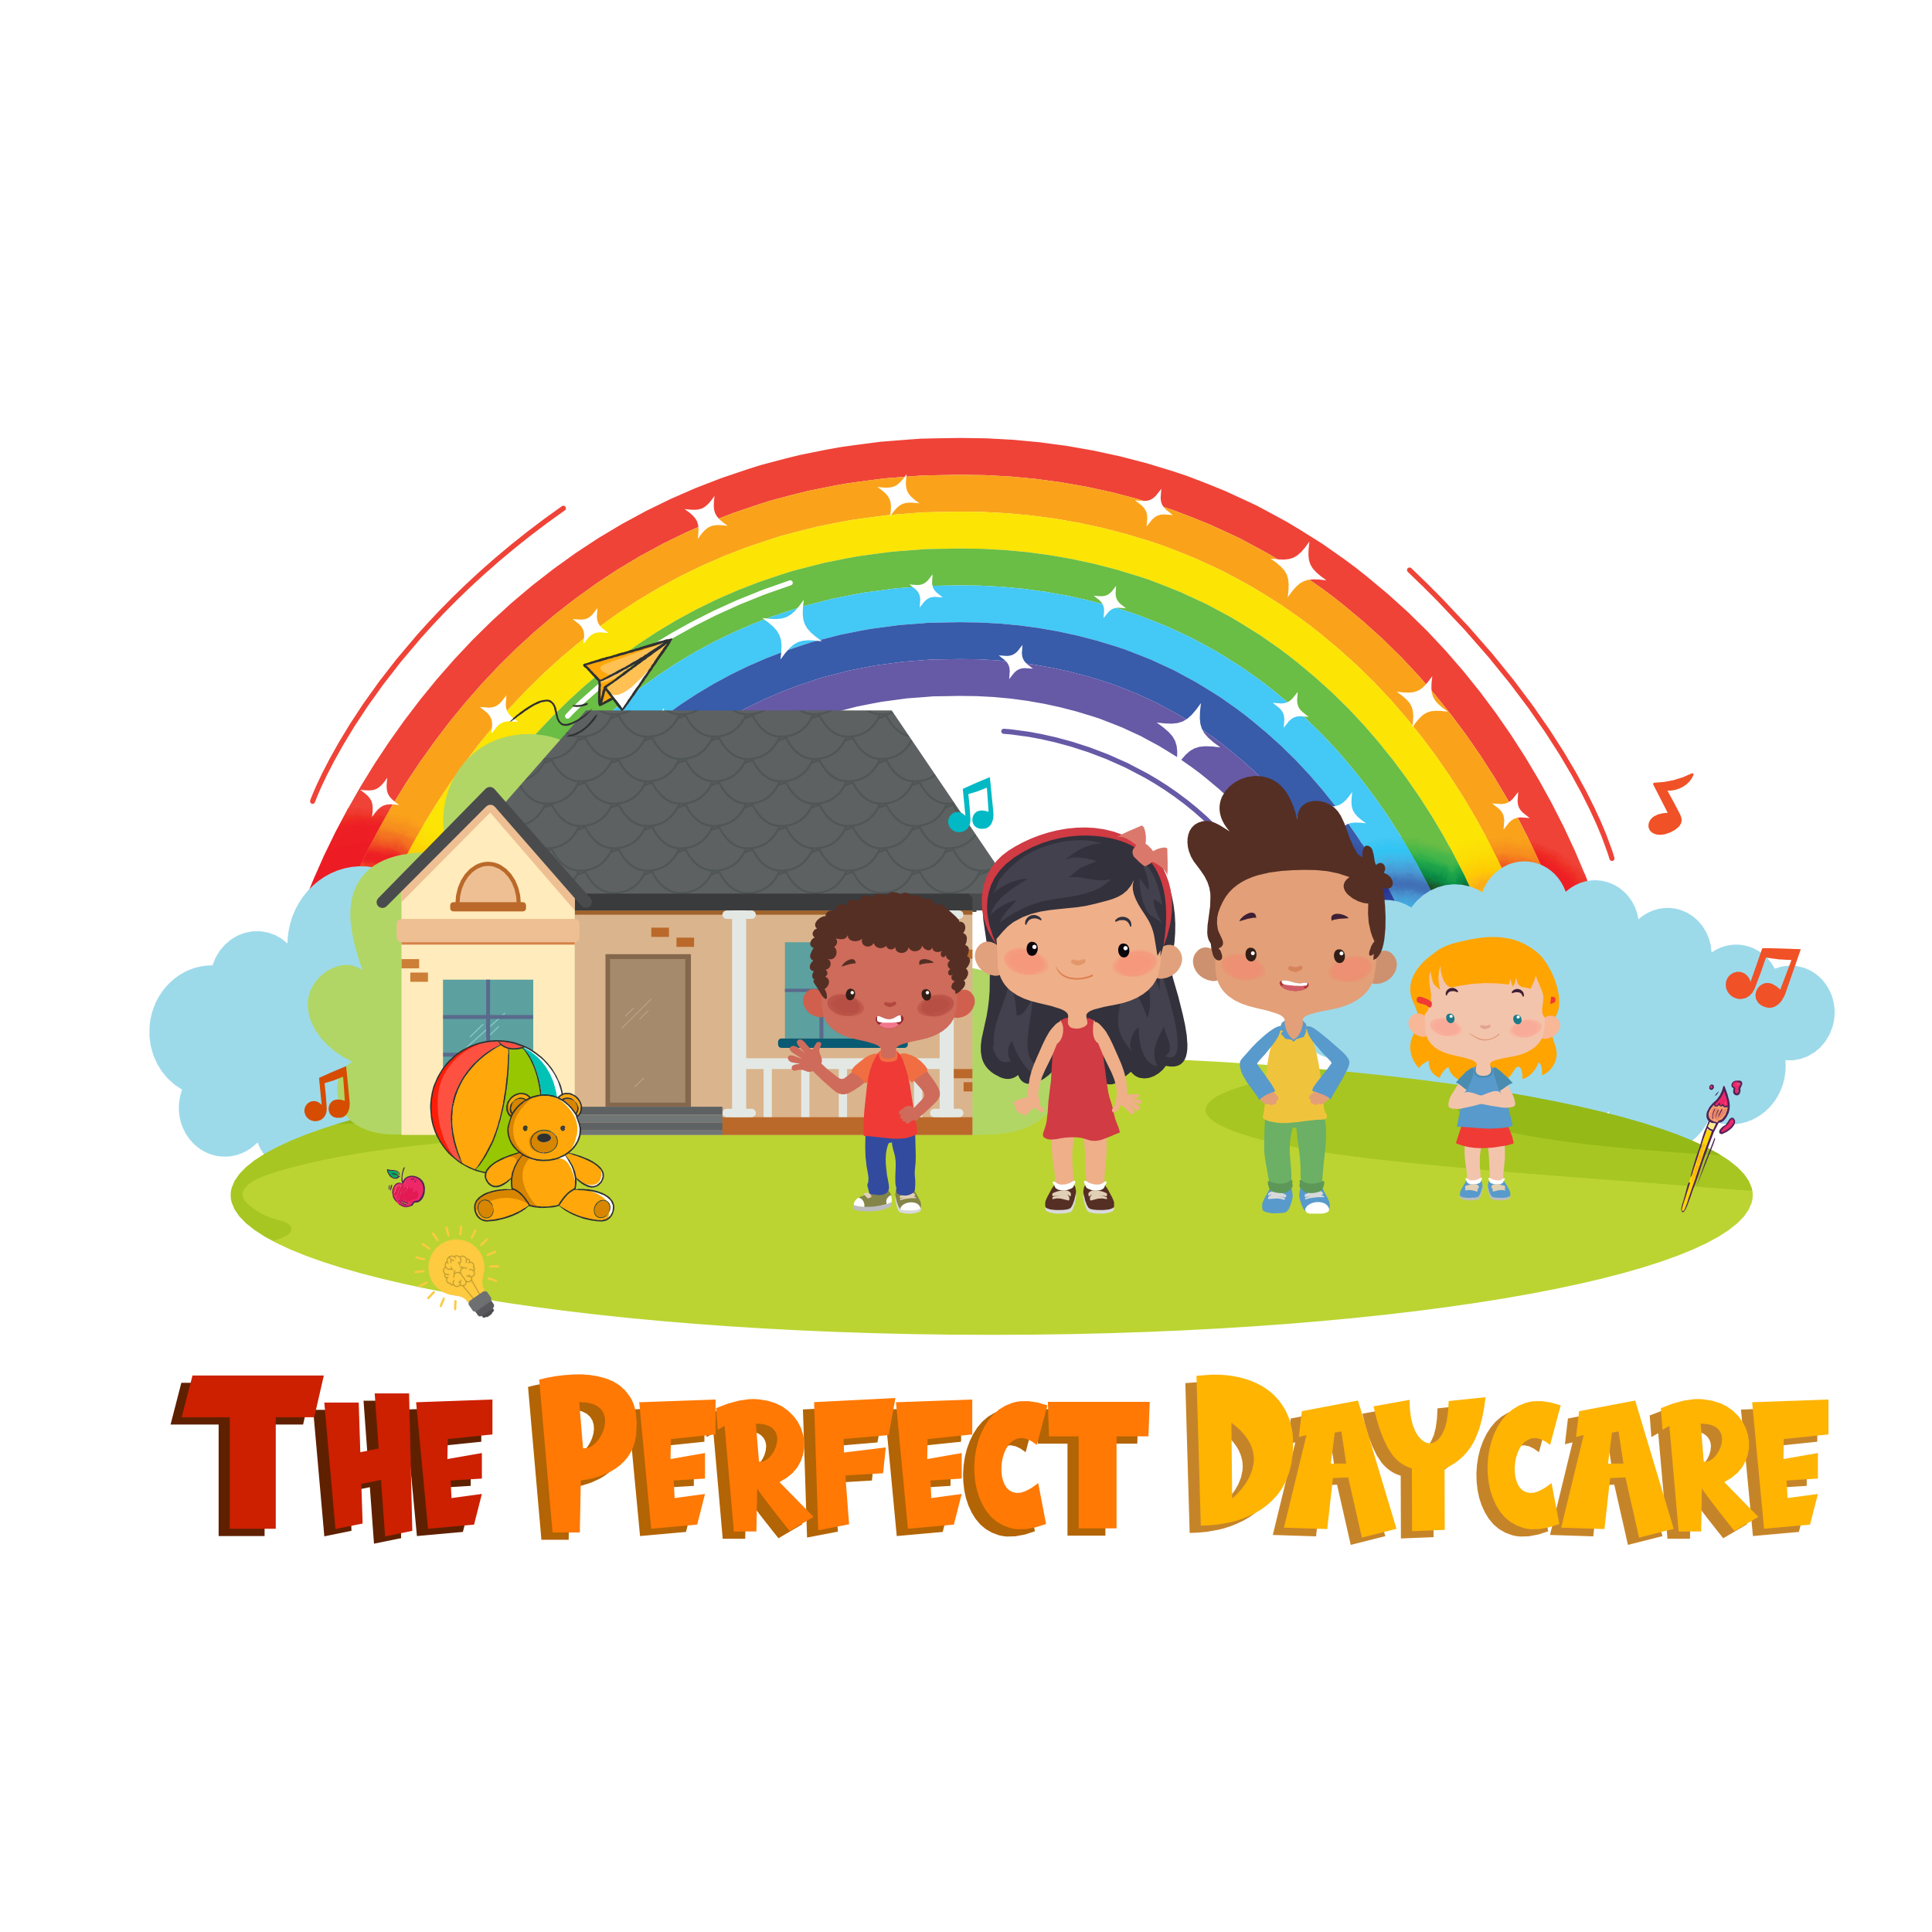 Welcome to The Perfect Daycare